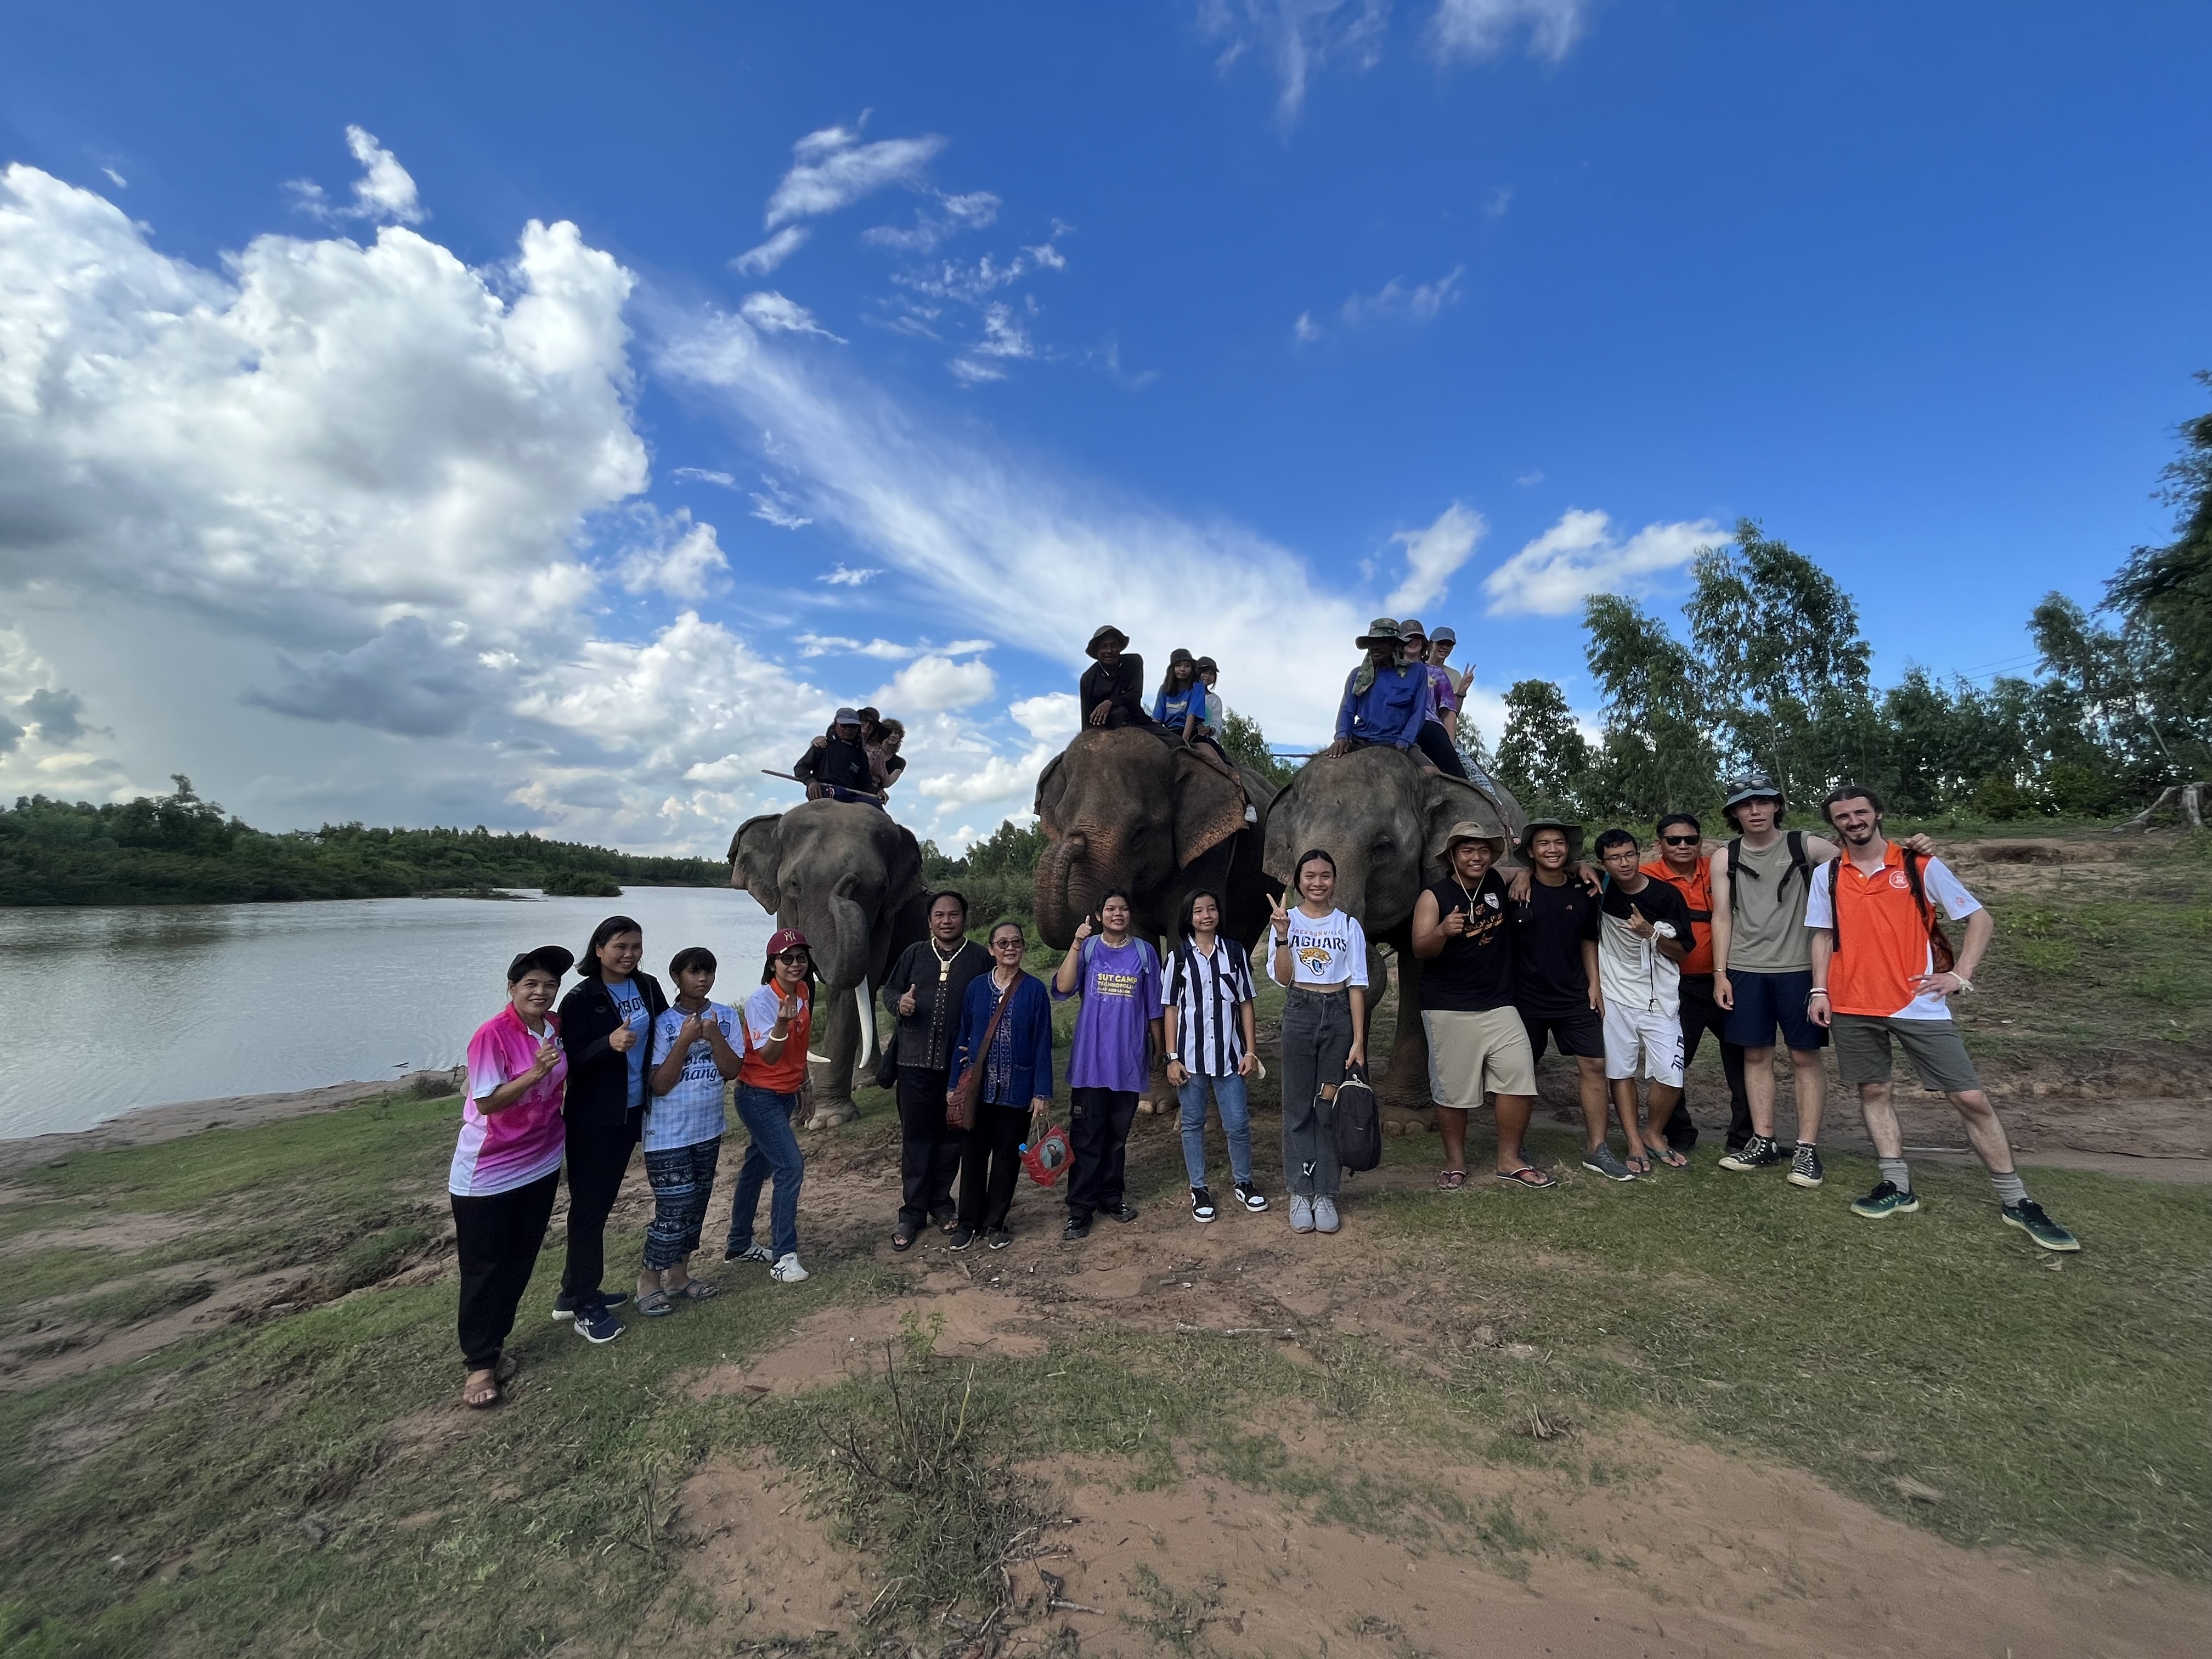 A group of Thai and American students smile together under a blue sky, some students are riding elephants.